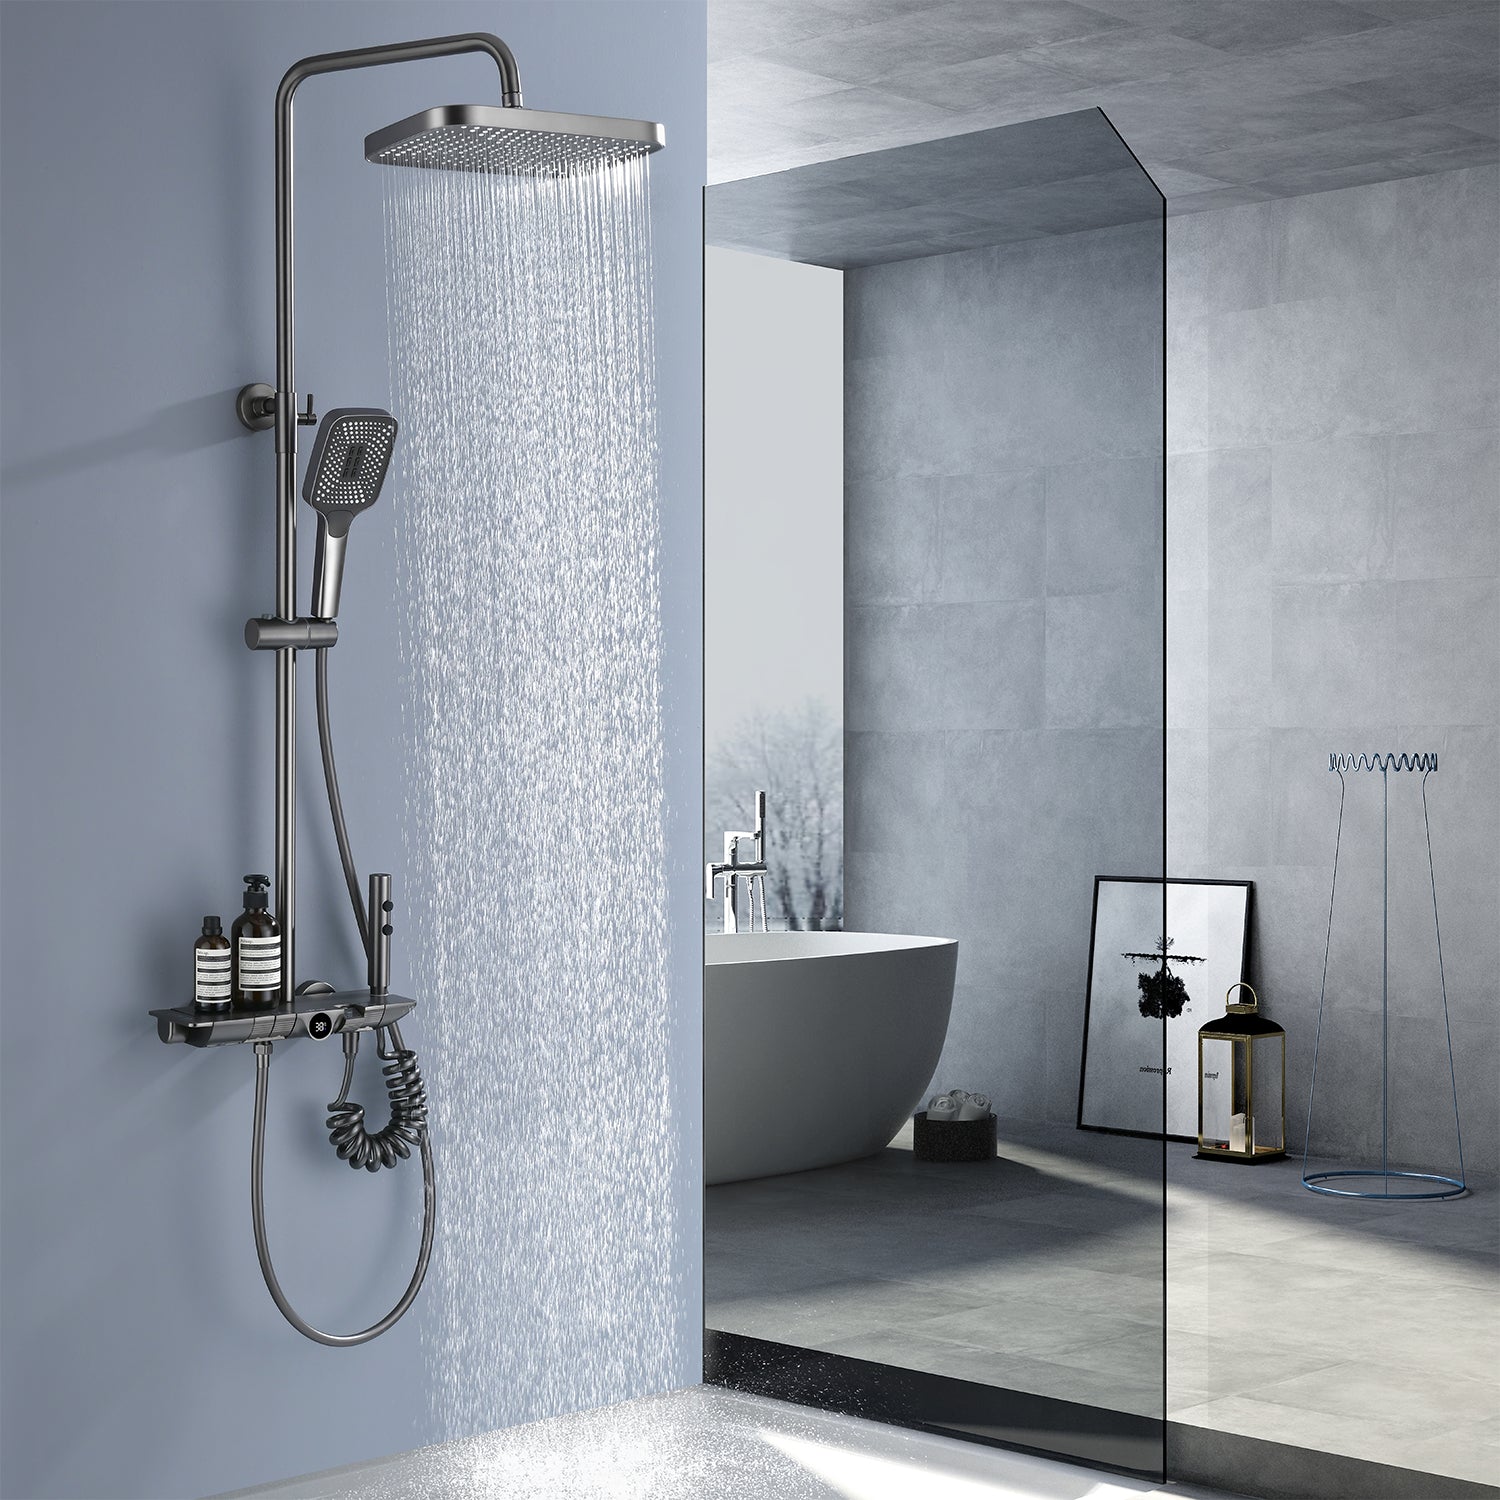 Lefton All-In-One Shower System with Temperature Display and 4 Water Outlet Modes-SST2204